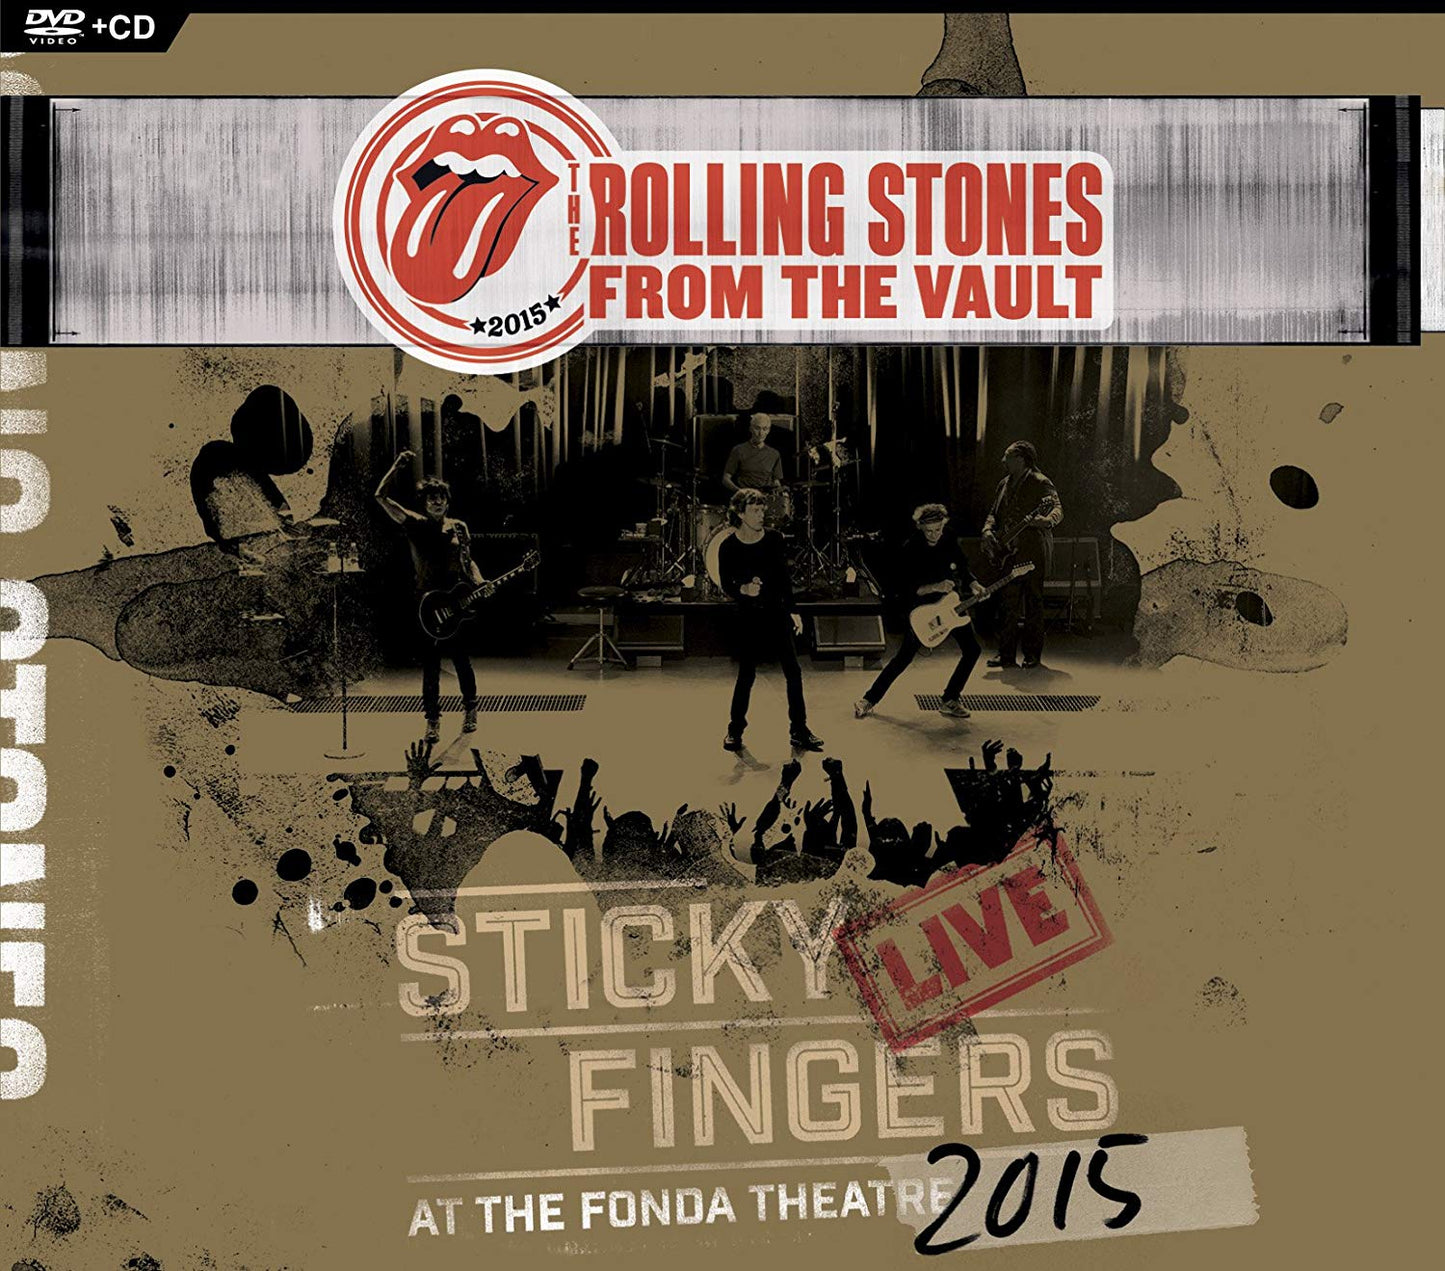 Rolling Stones - Sticky Fingers Live 2015 - CD/DVD